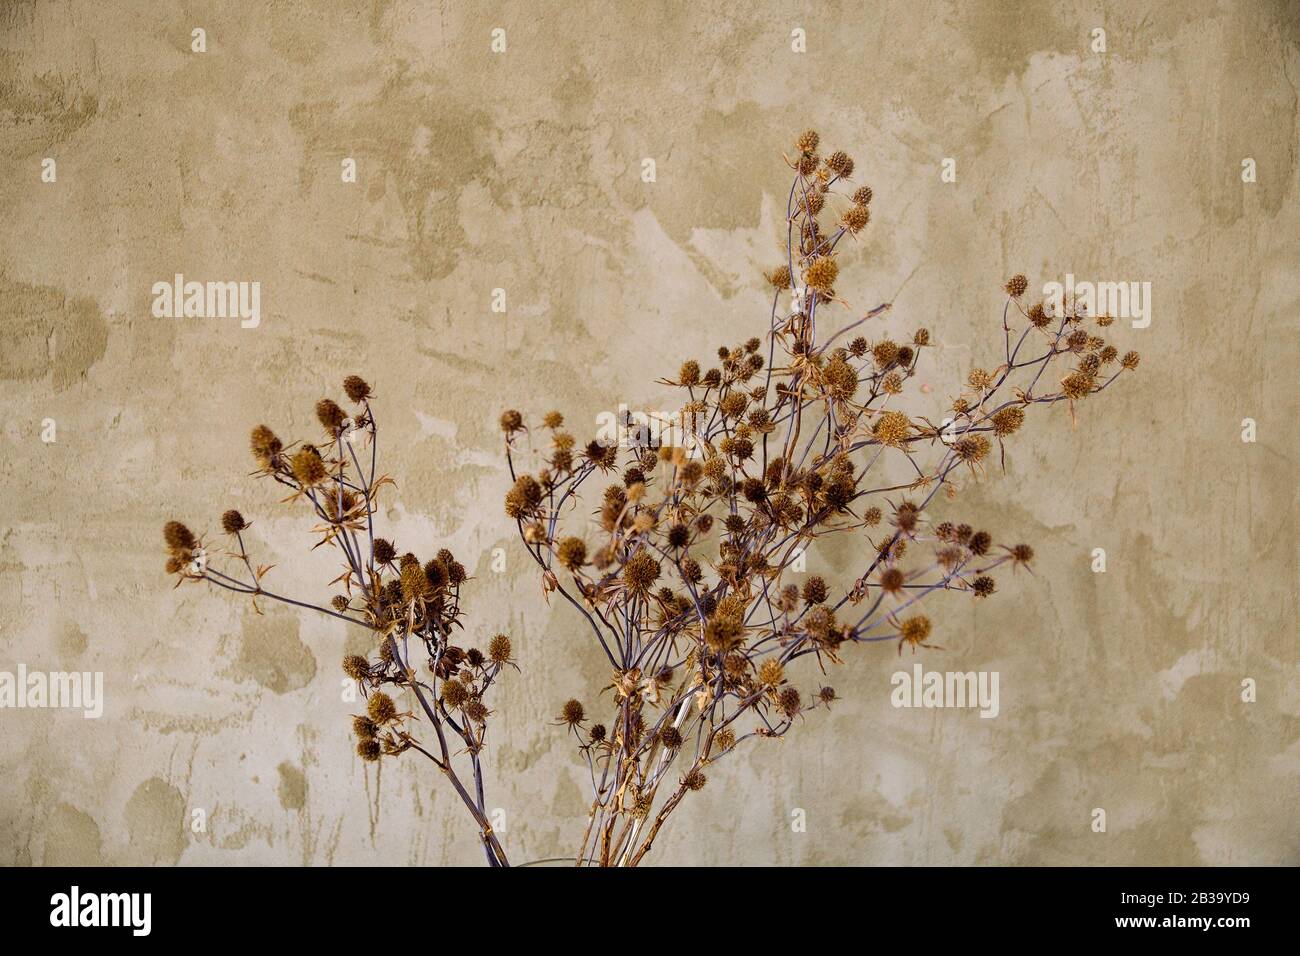 thistle bouquet of dried flowers on a concrete wall background Stock Photo